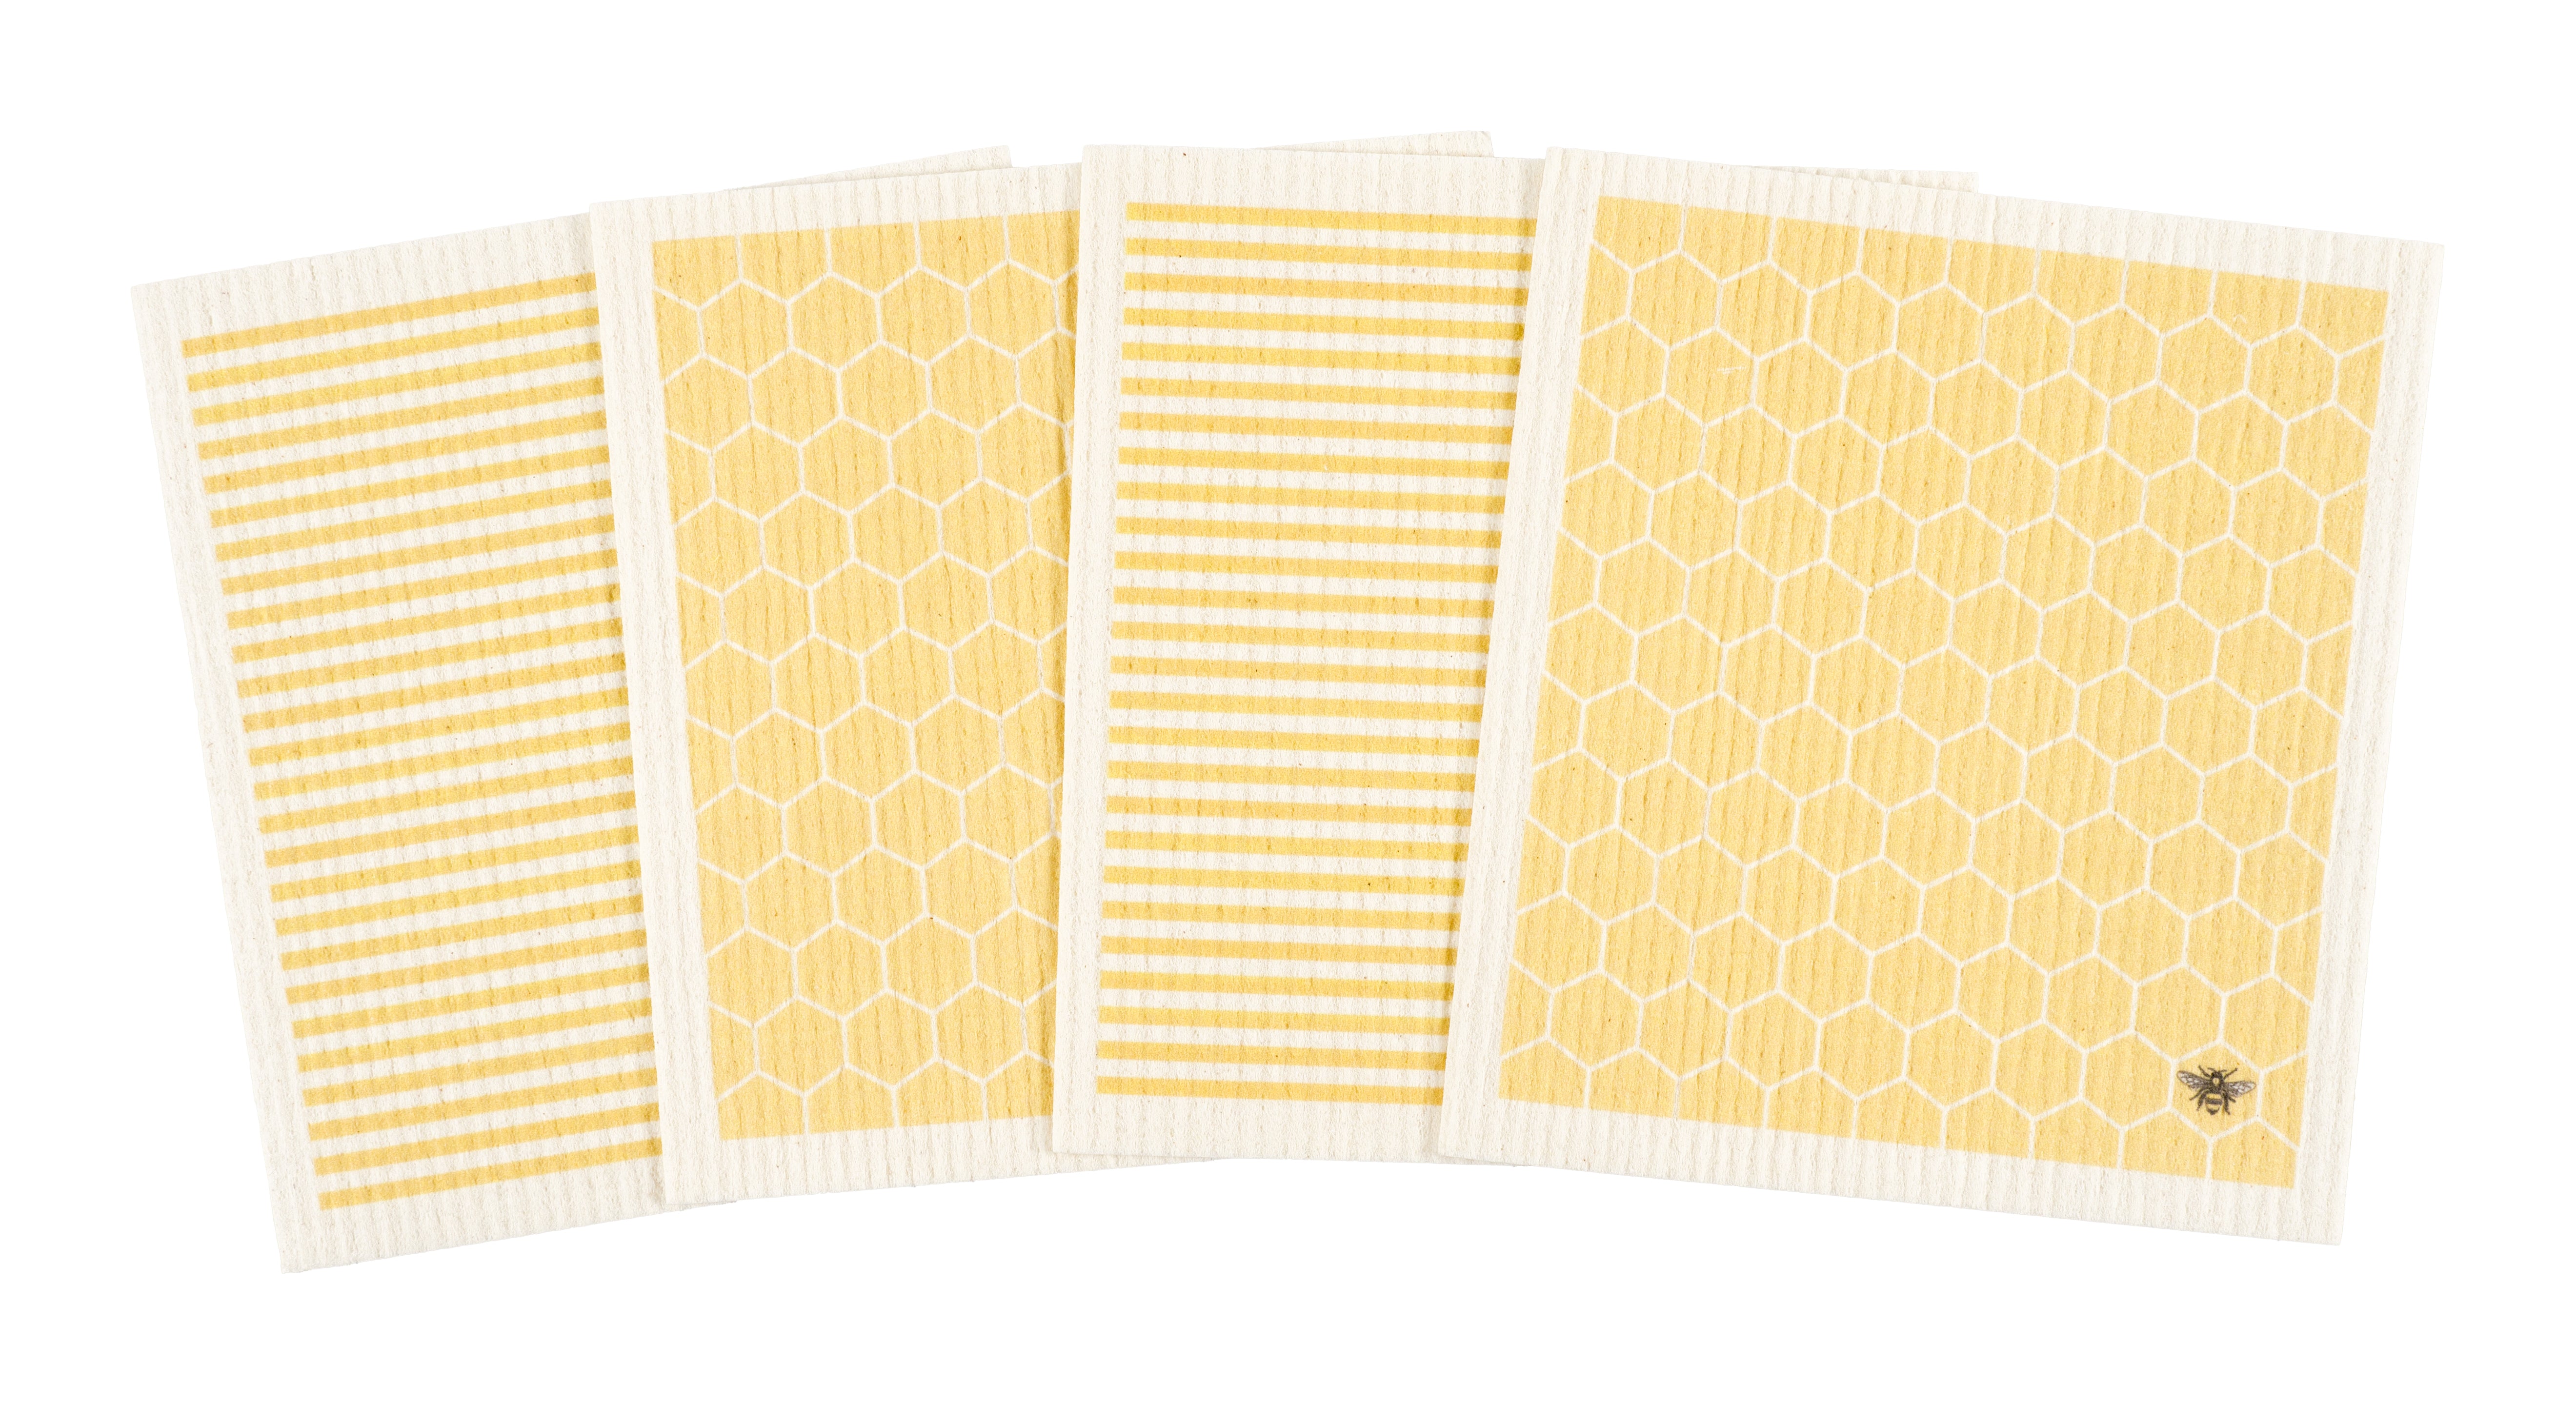 Kaf Home Swedish Dish Cloths - Set Of 4, Reusable, Absorbent Cellulose  Sponge Towels For Kitchen, Cleaning Counters, And Dishes (all Over Lemon) :  Target